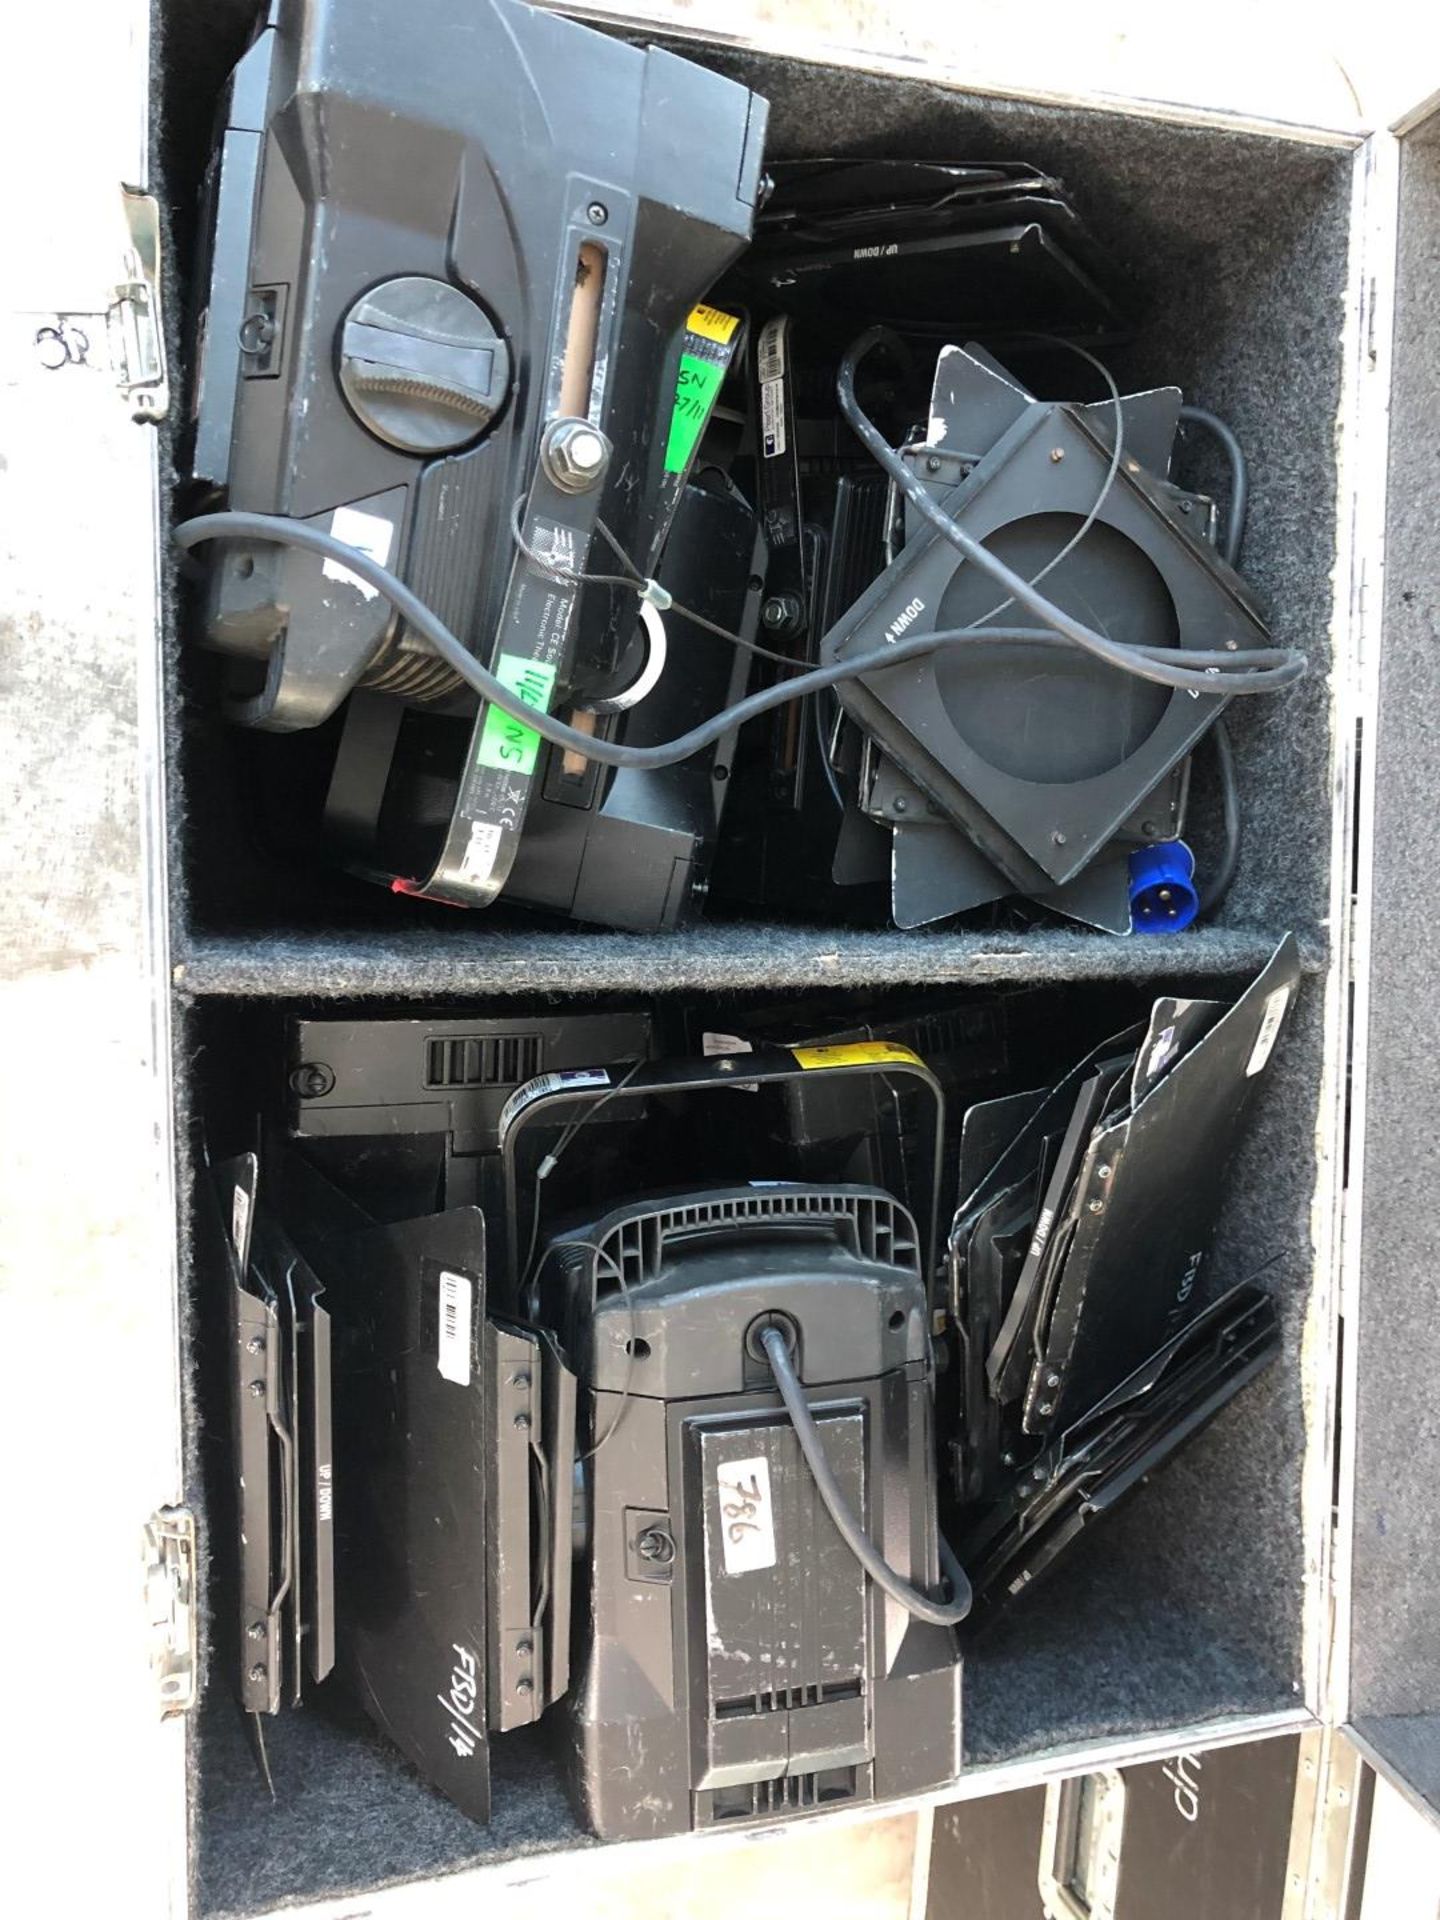 6 x Source Four S4 Fresnel Lights With Gel Holders, Barn Doors & Safety Cables - In Flight Case - Image 3 of 3